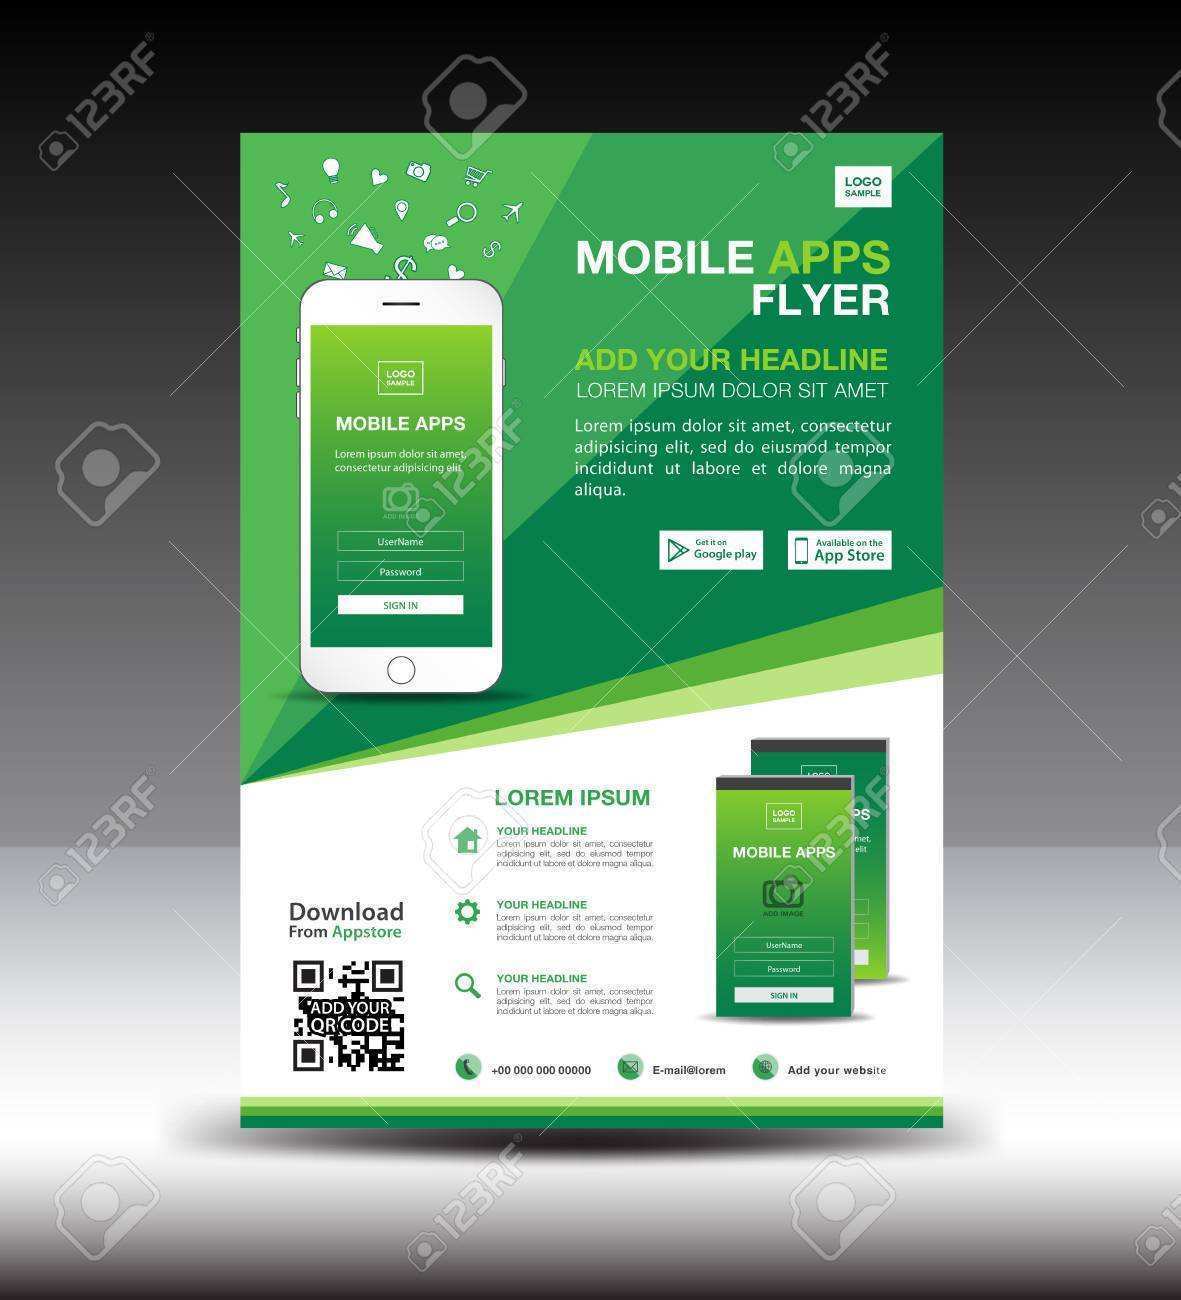 70 Format Mobile App Flyer Template Free Photo for Mobile App Flyer Template Free